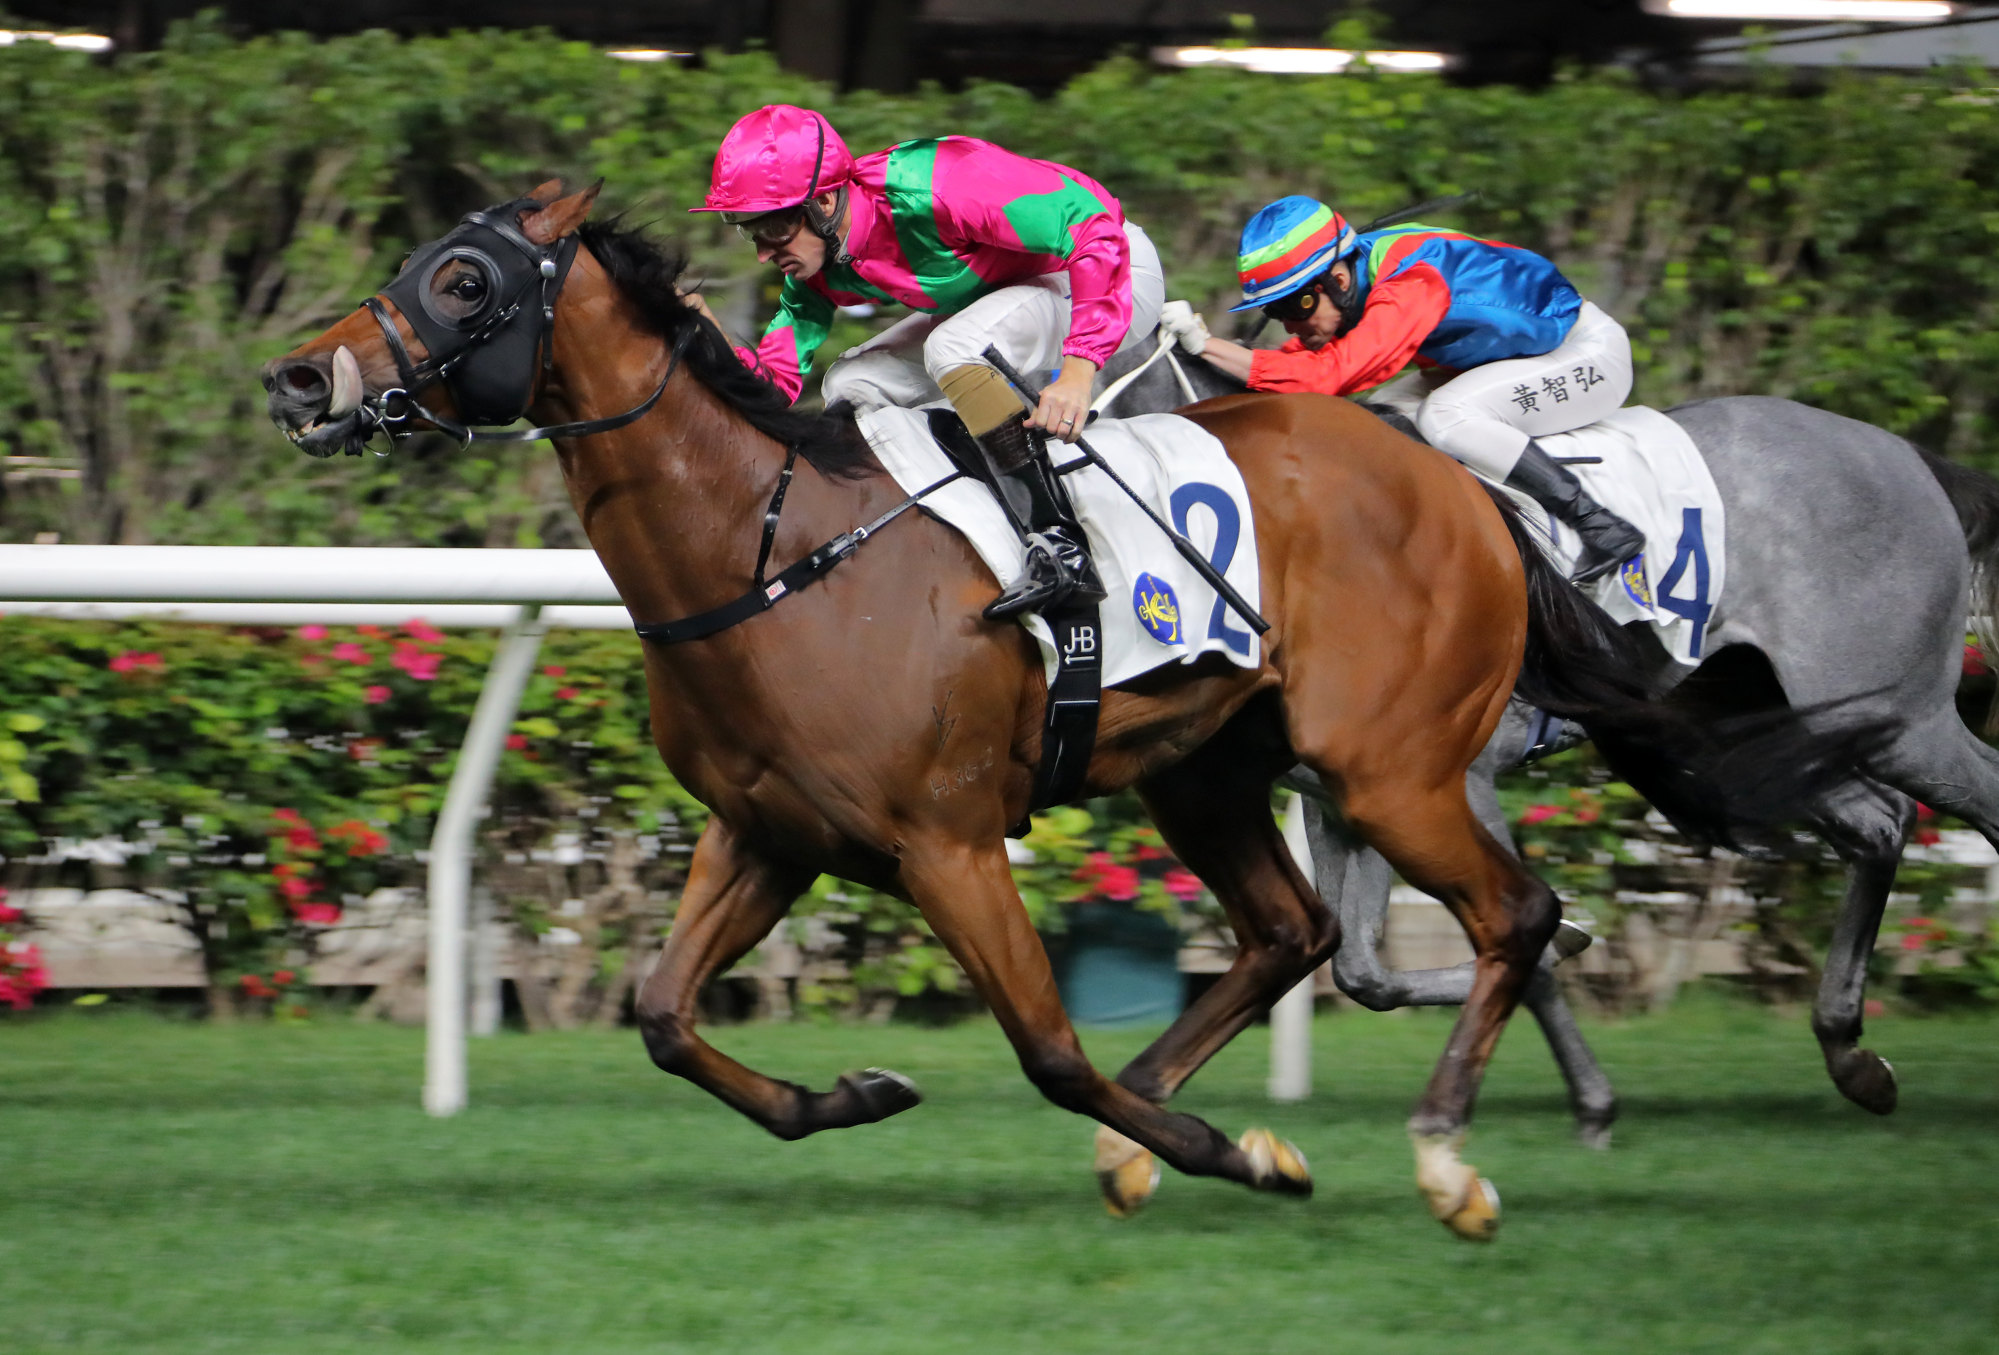 Hugh Bowman guides Celestial Colours to victory at Happy Valley on March 6.